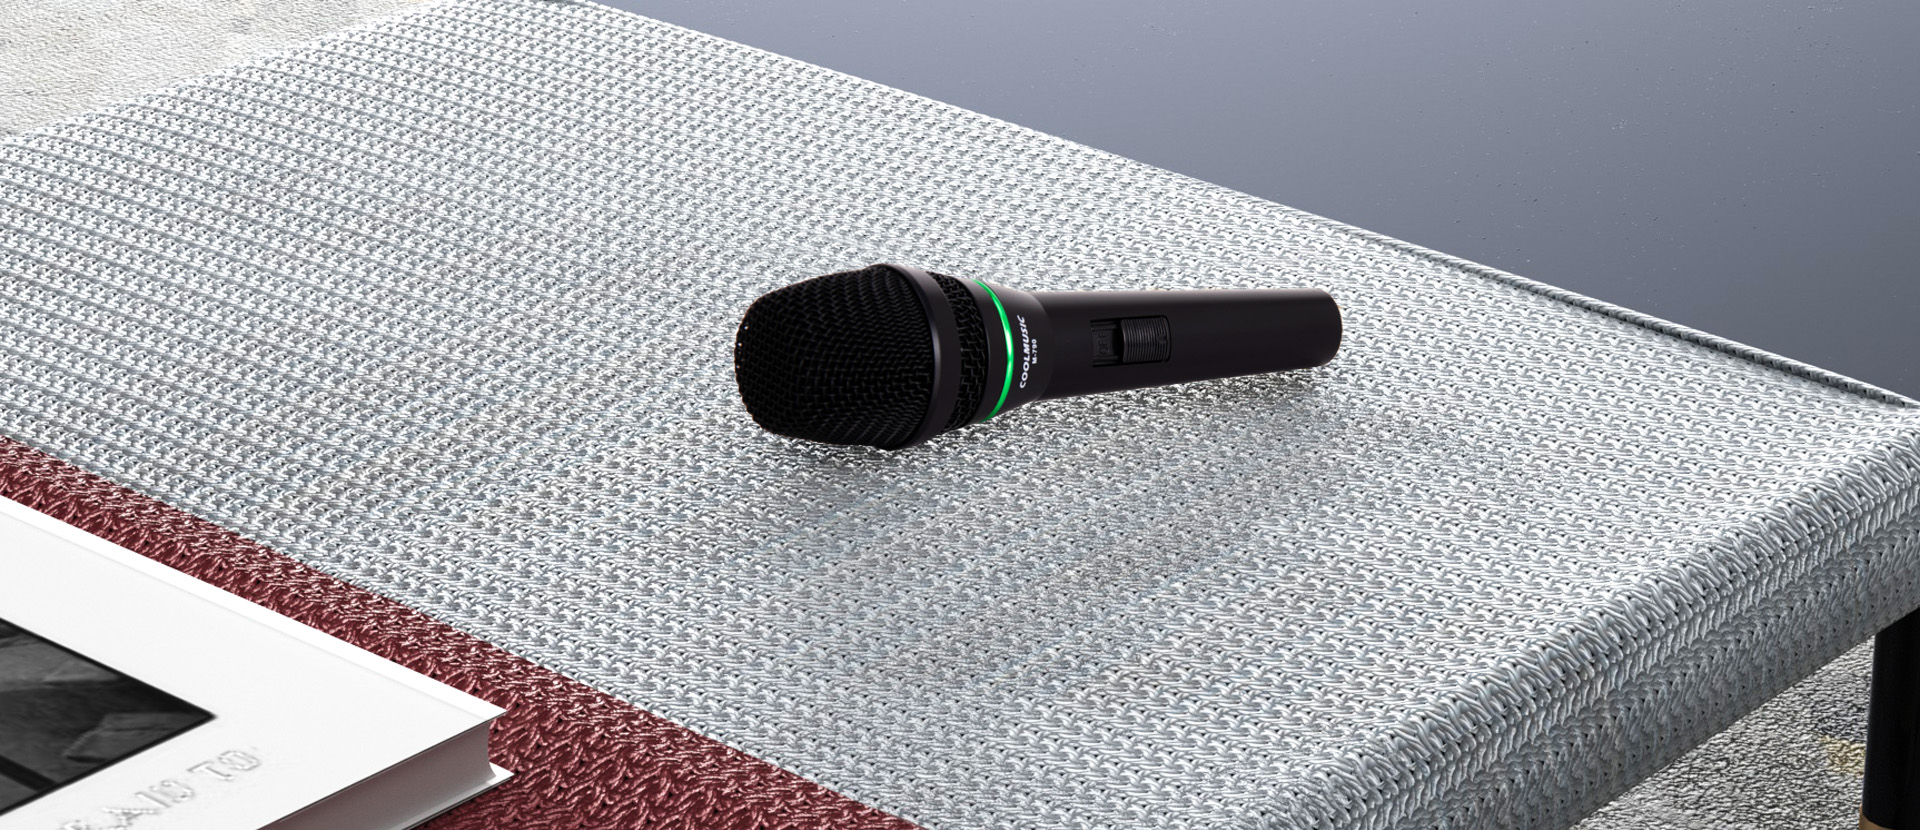 Wire Microphone